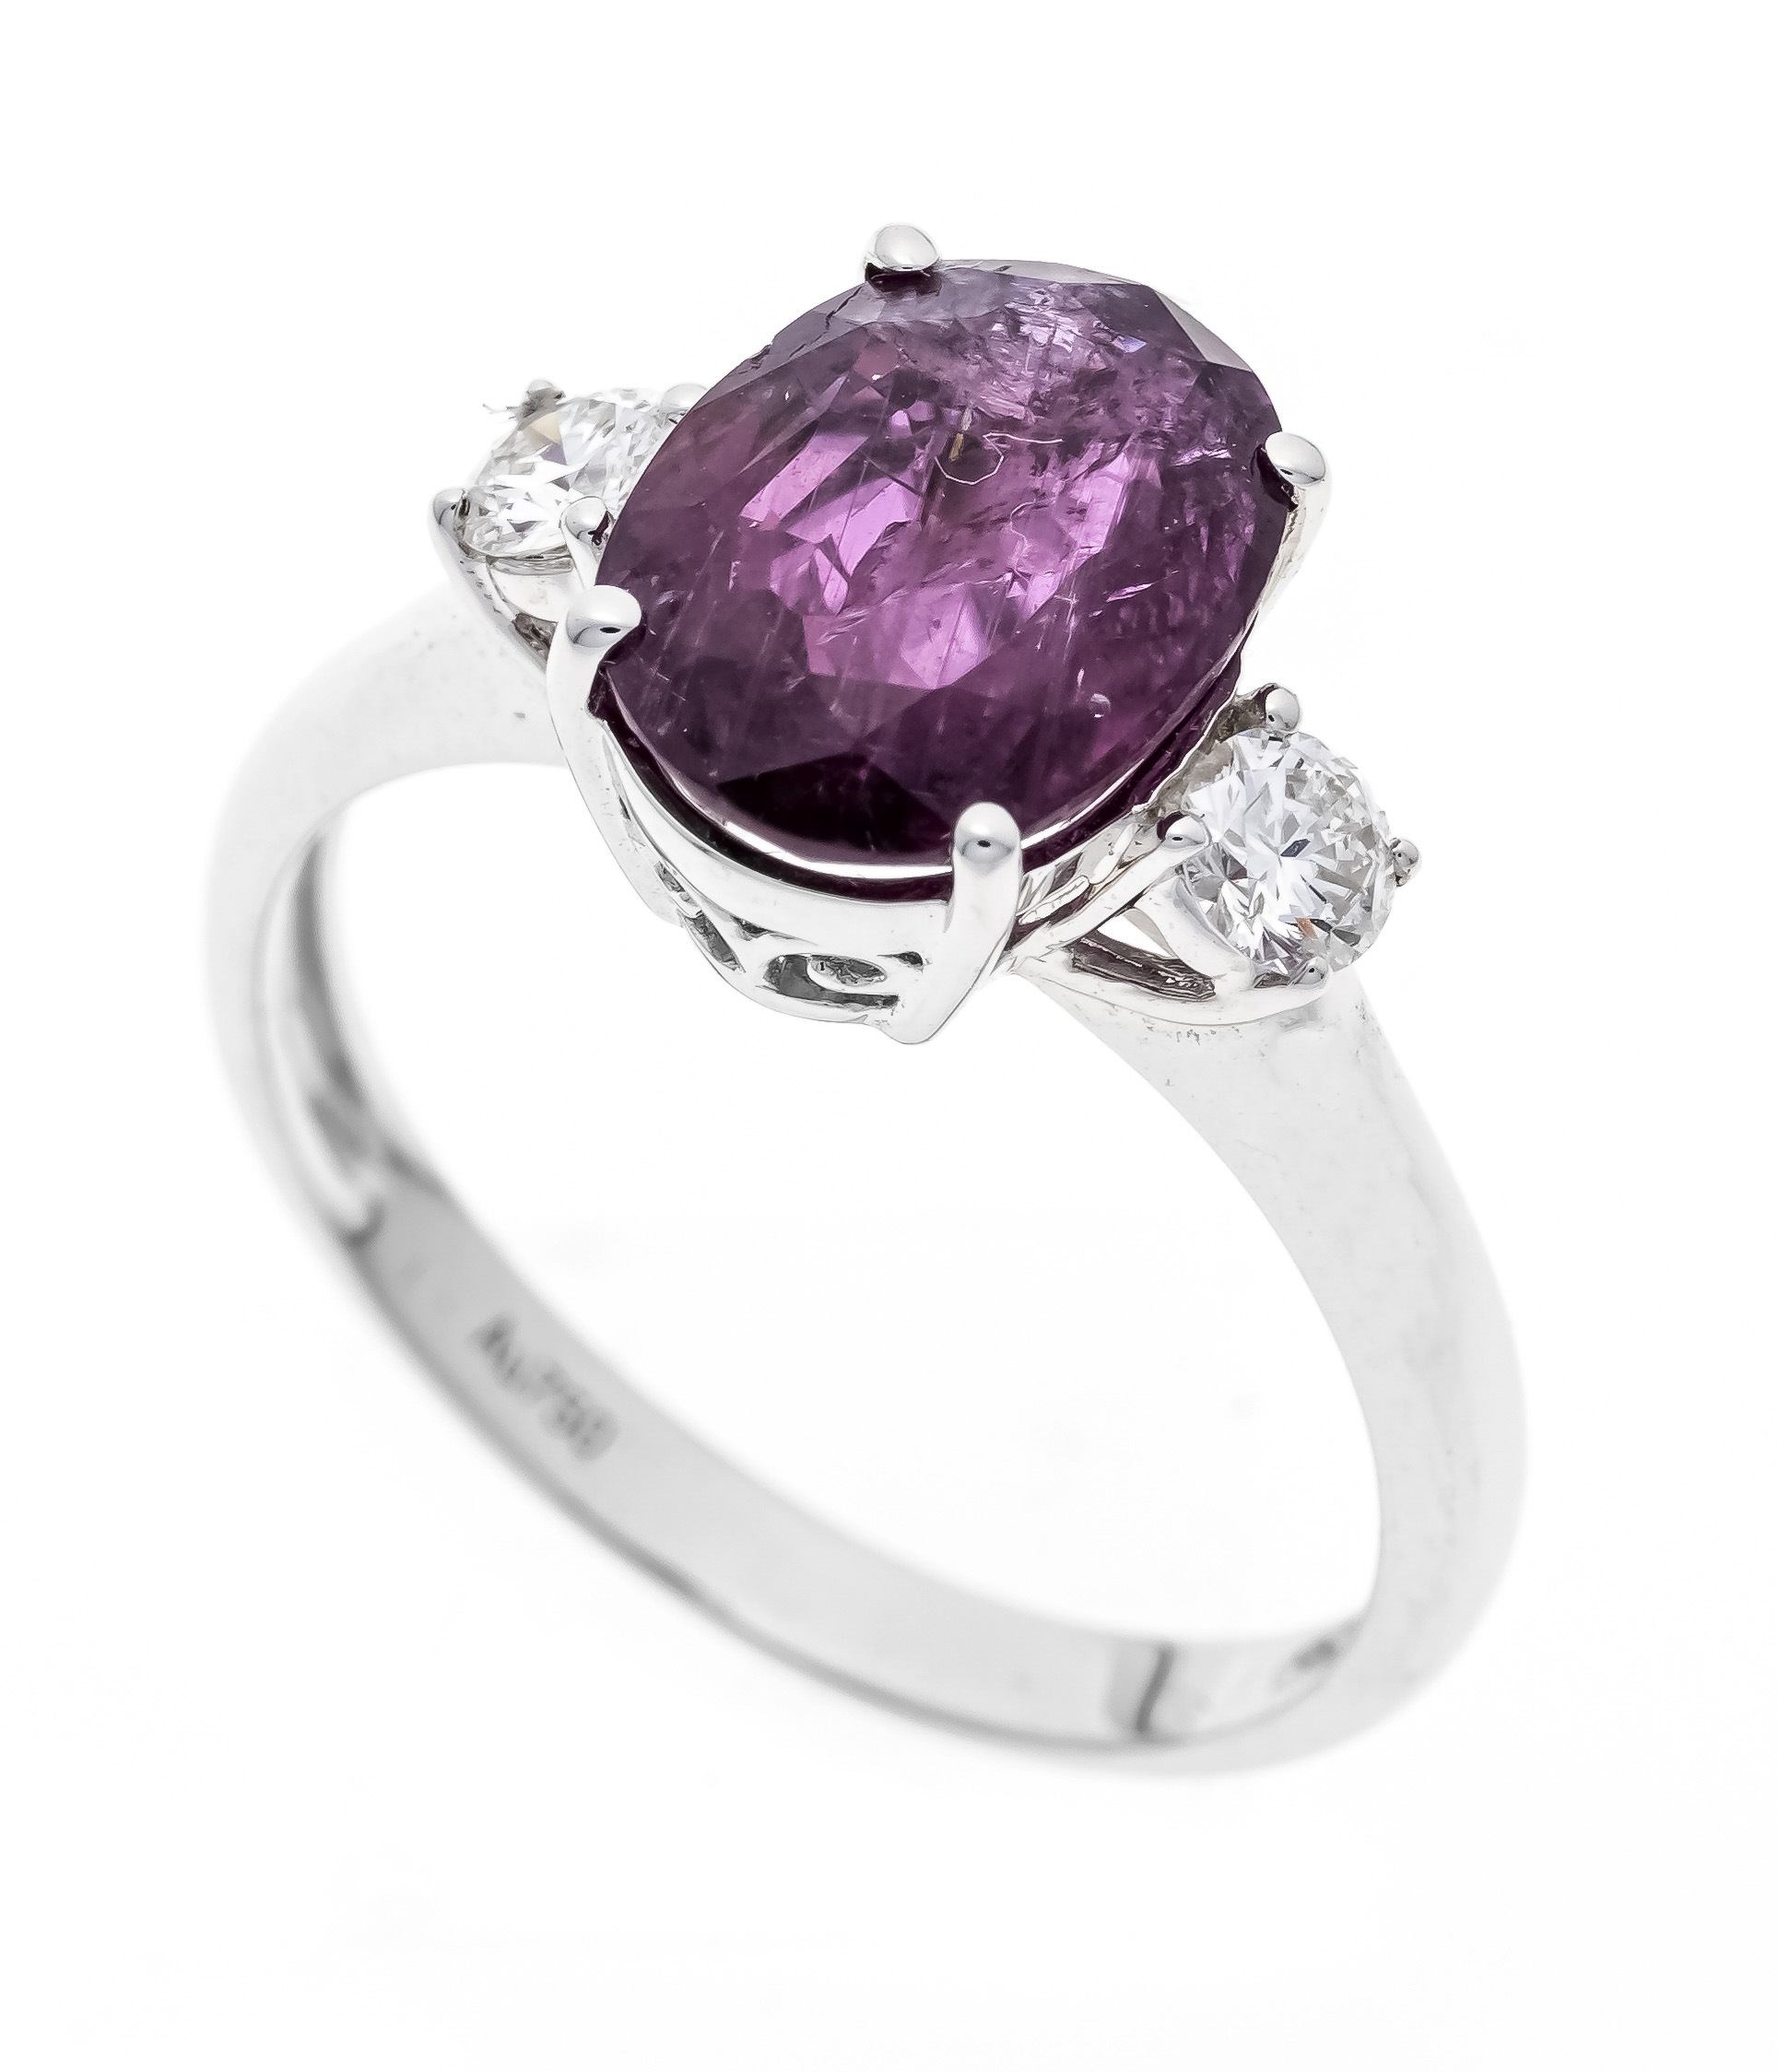 Ruby-brilliant ring WG 750/000 with an oval faceted ruby 1.67 ct darker red, translucent, 7.24 x 6.